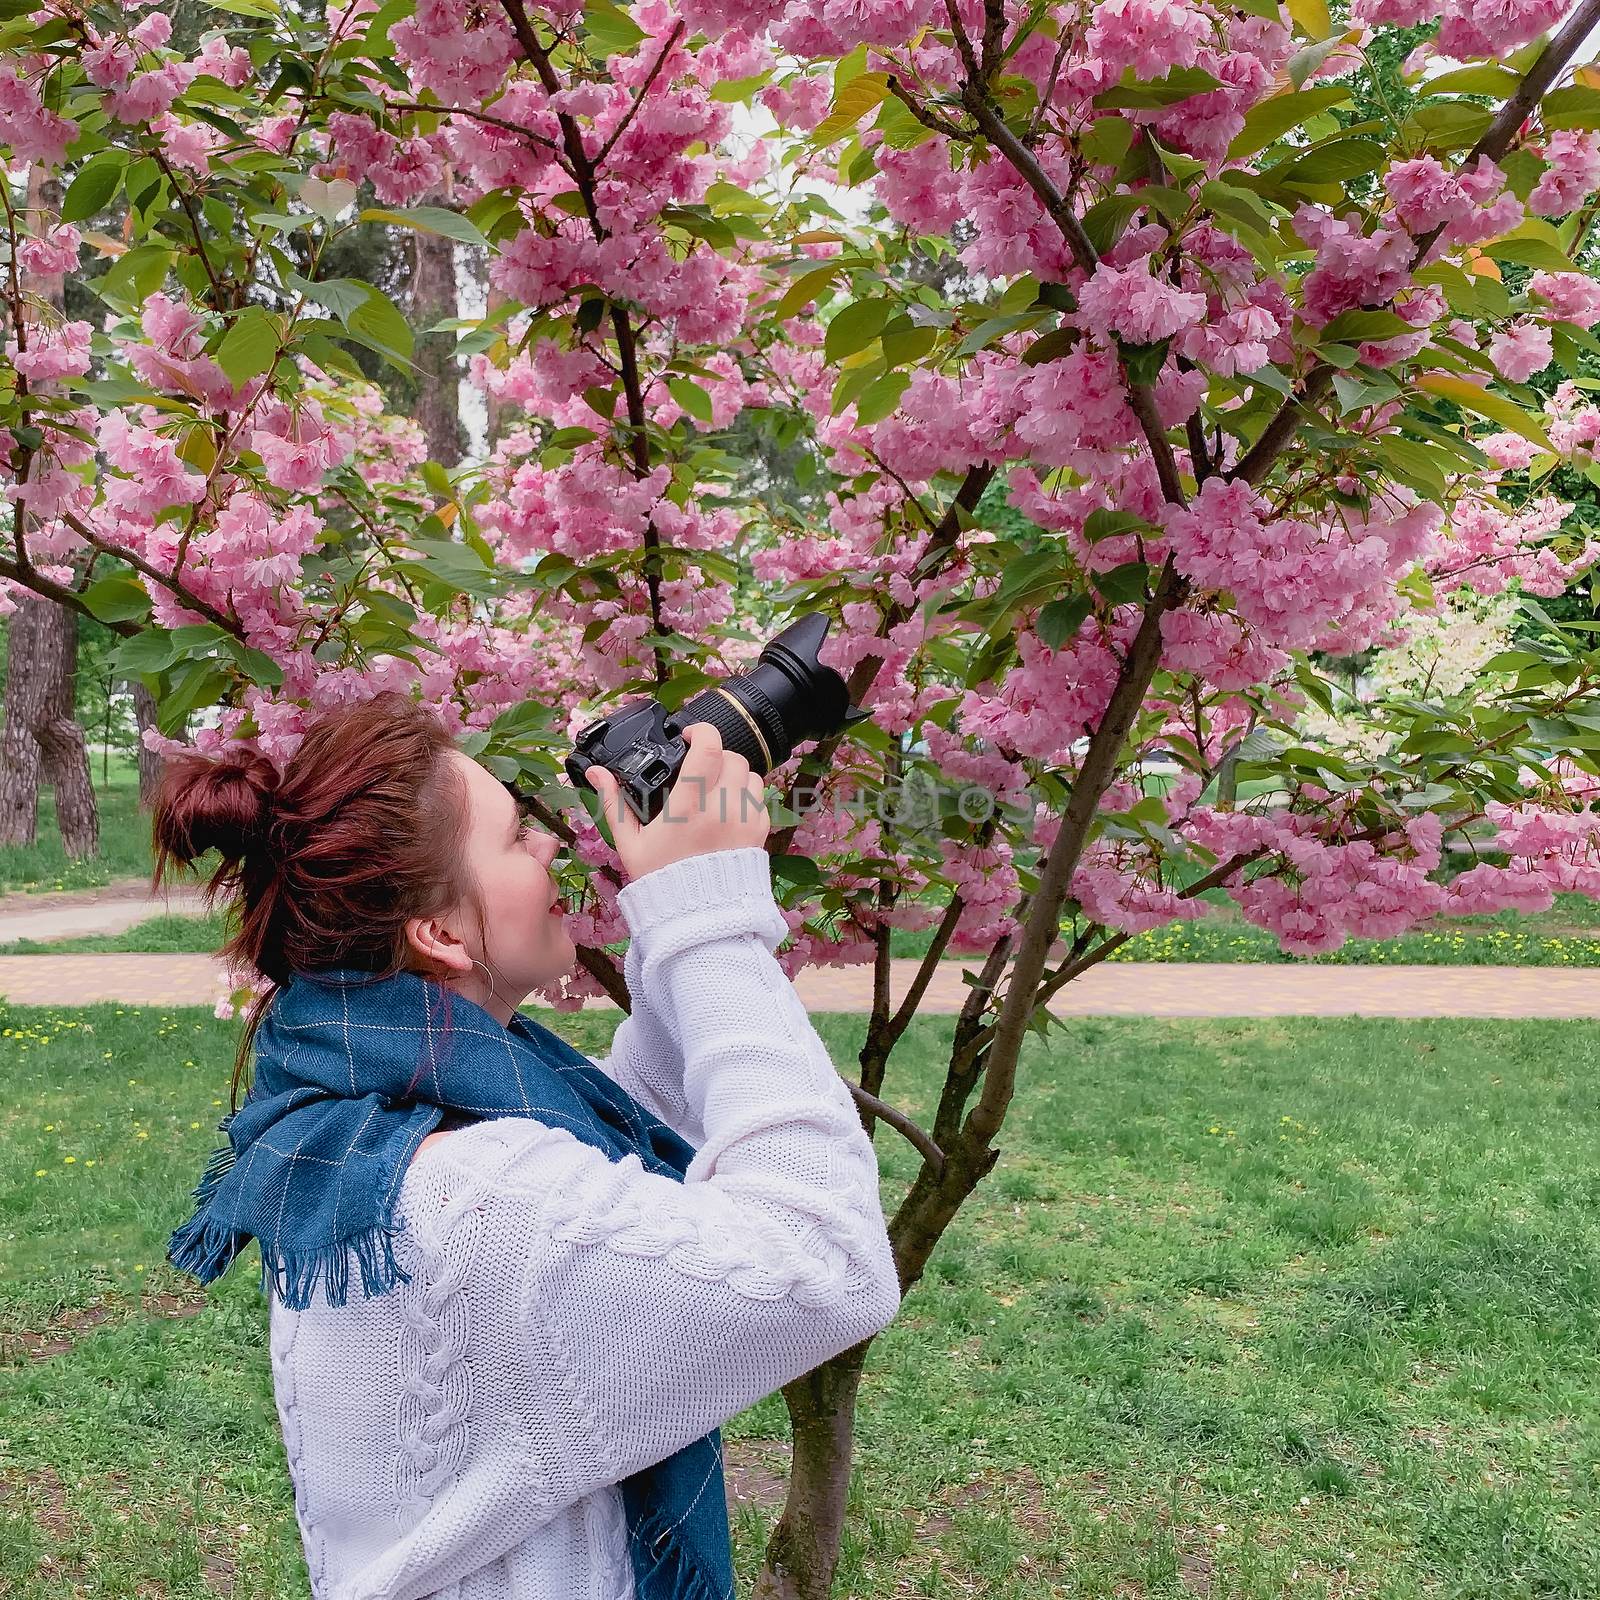 young happy smiling red-haired woman with a white sweater and blue scarf takes a picture with a flowering pink sakura tree in a park in the city of Kiev, Ukraine.